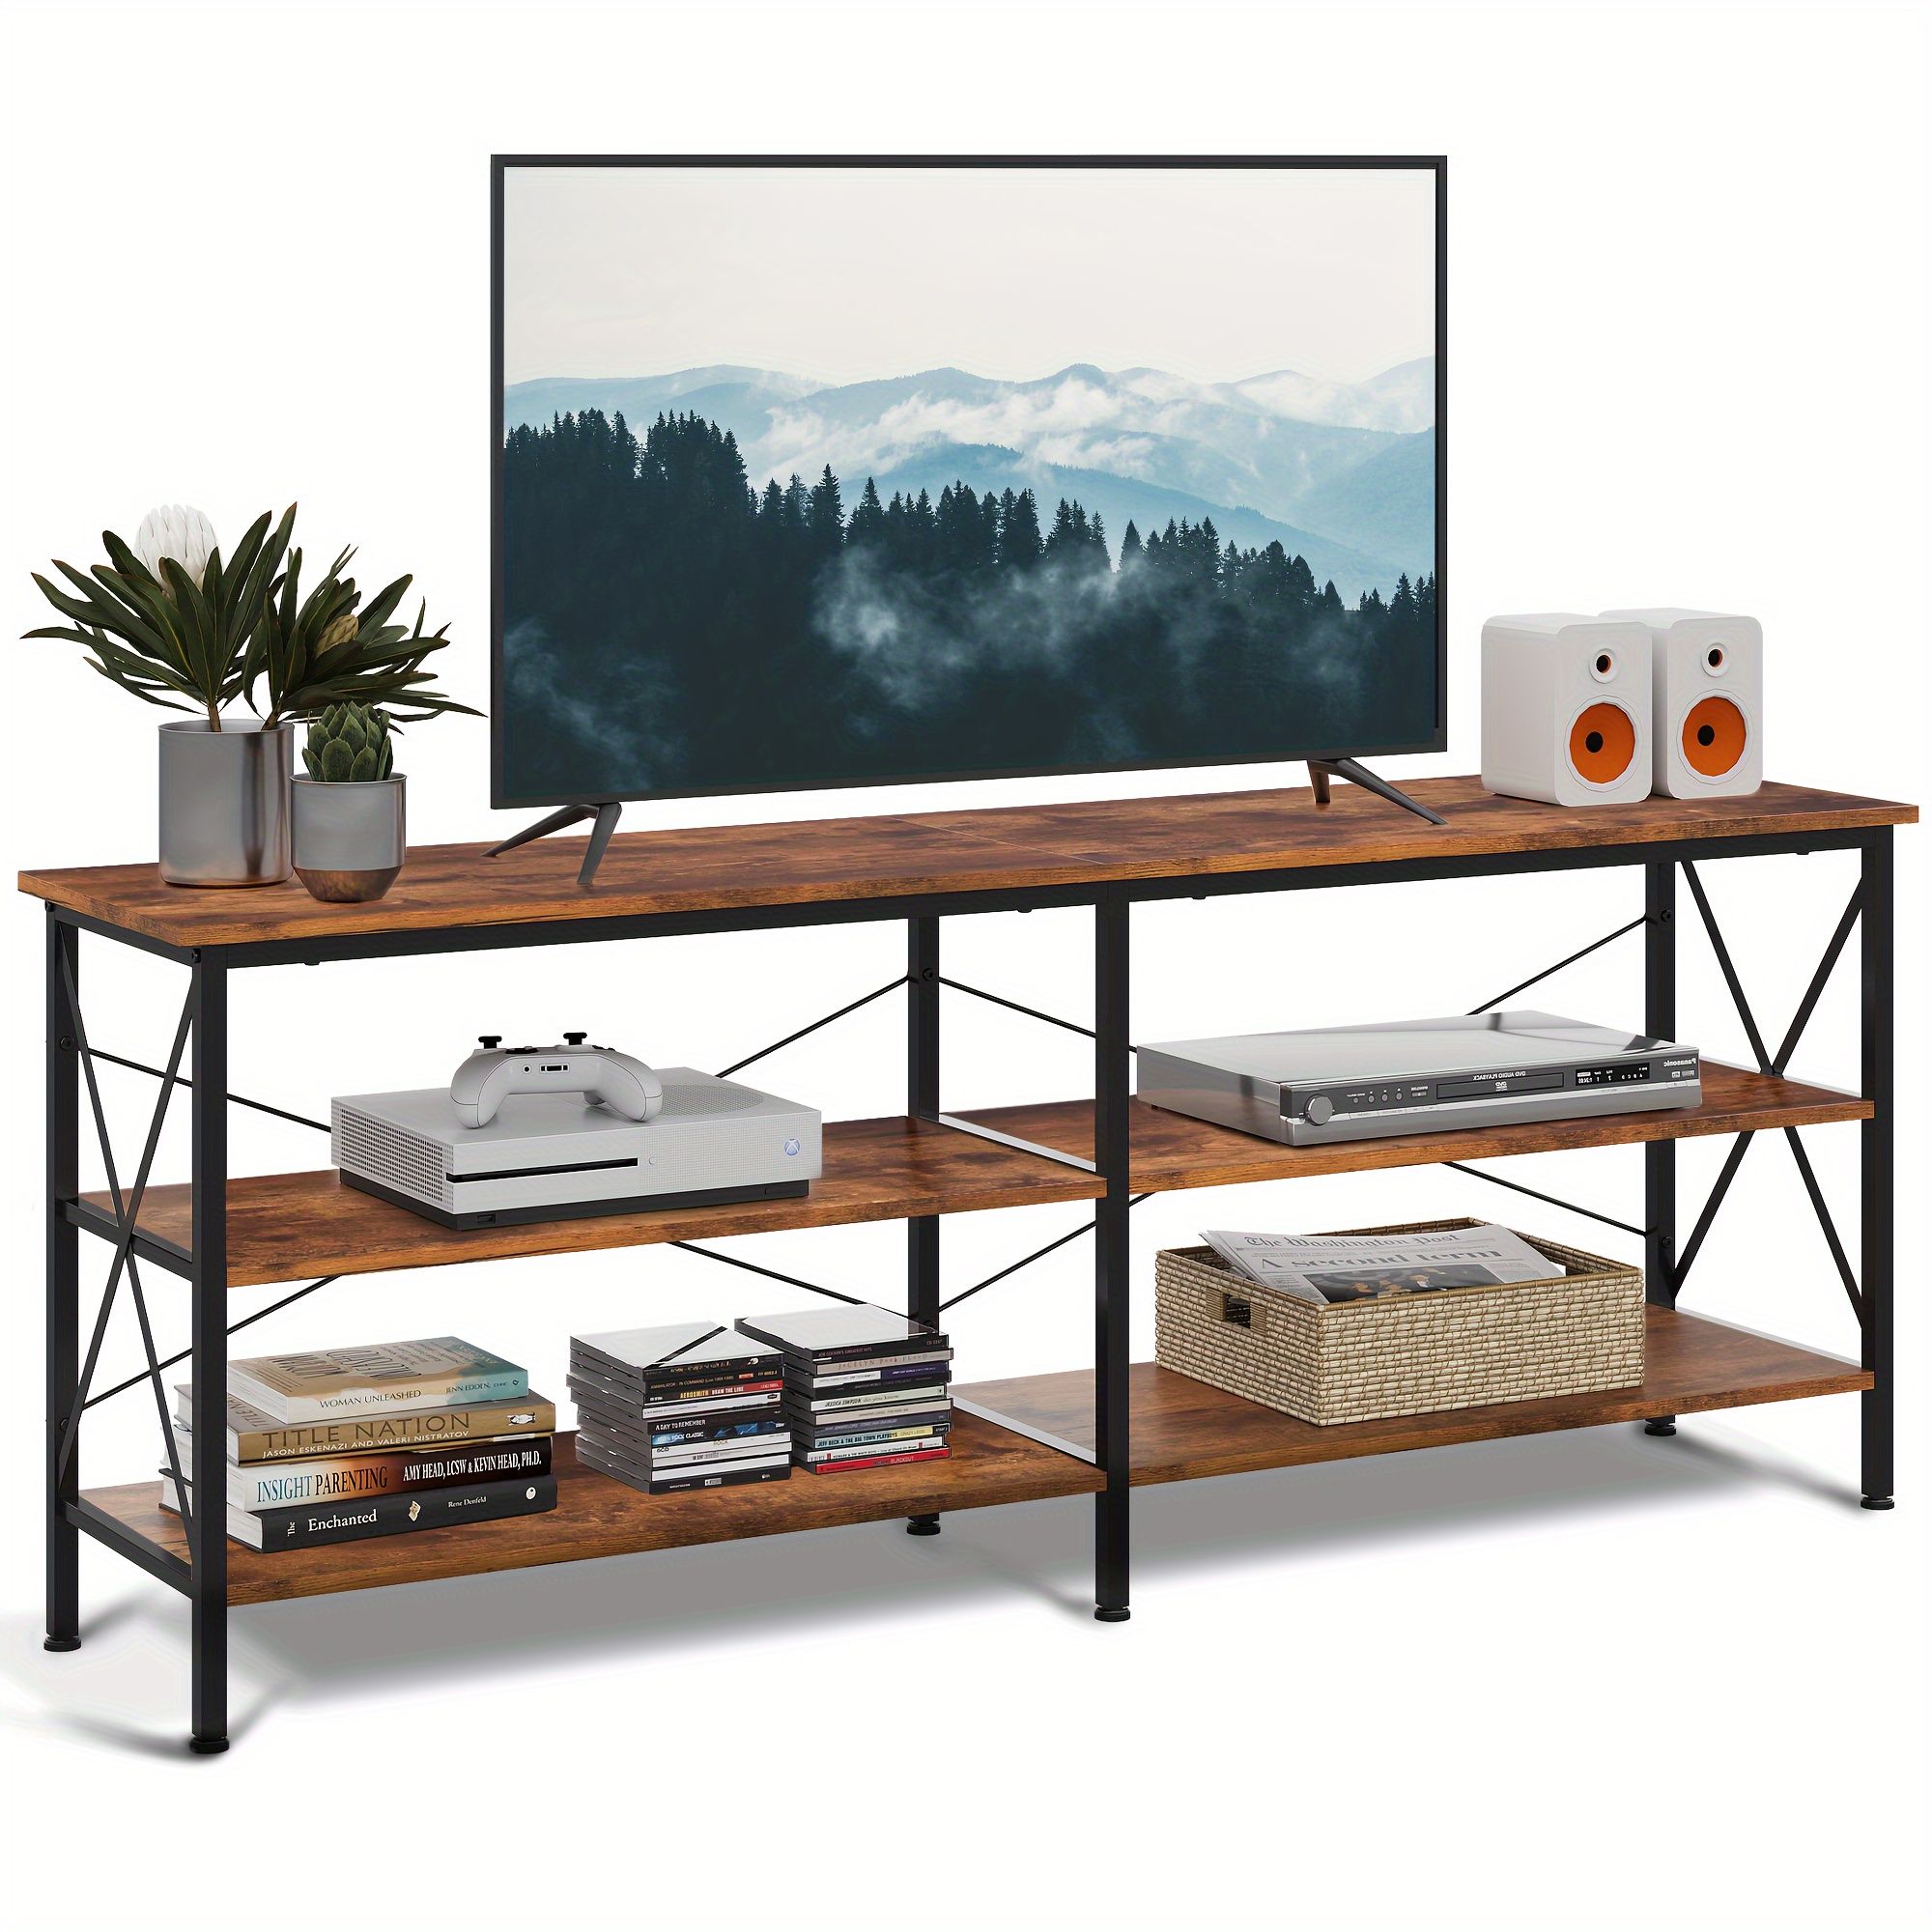 

Wlive Tv Stand For 65 , Entertainment Center With Storage, Industrial For Living Room, Long 63" Tv Cabinet With Metal Frame